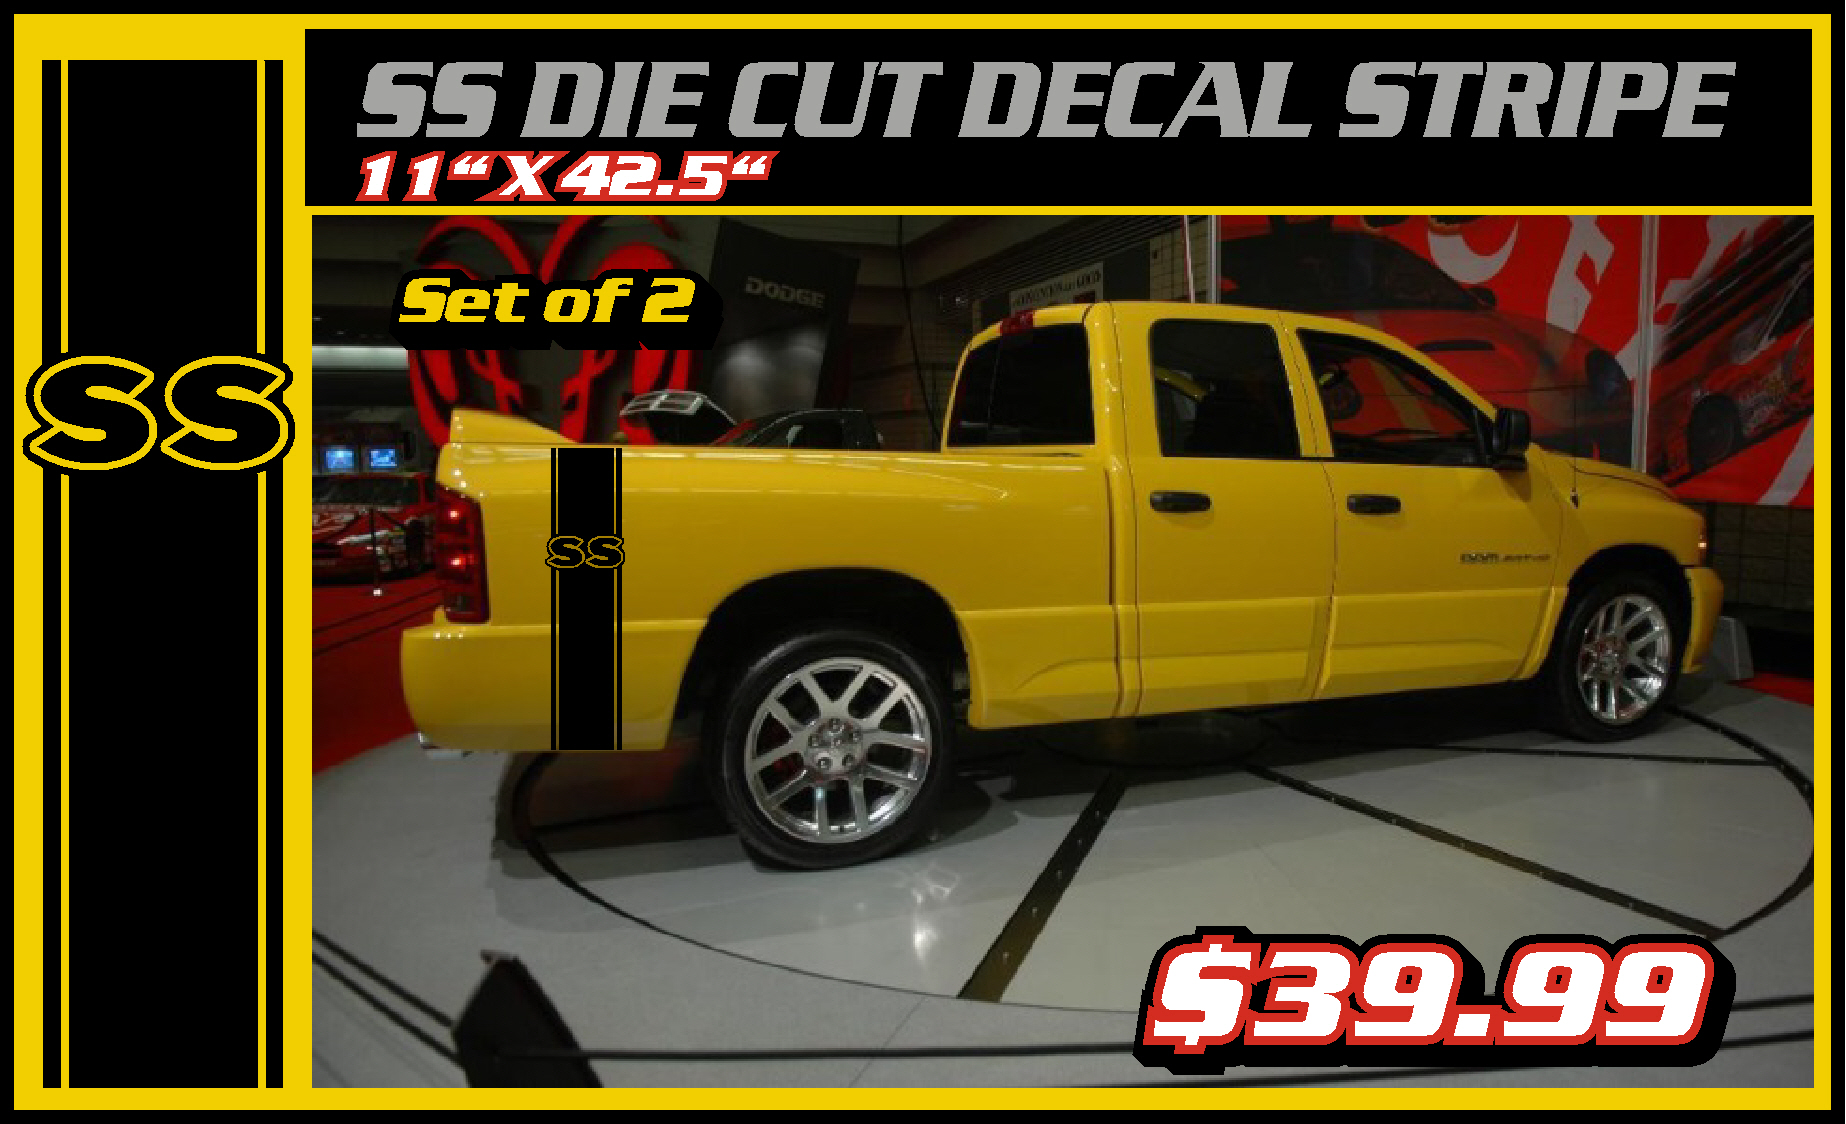 SS truck bed stripe kit decal vinyl sticker fits Dodge Chevy Ford Toyota GMC